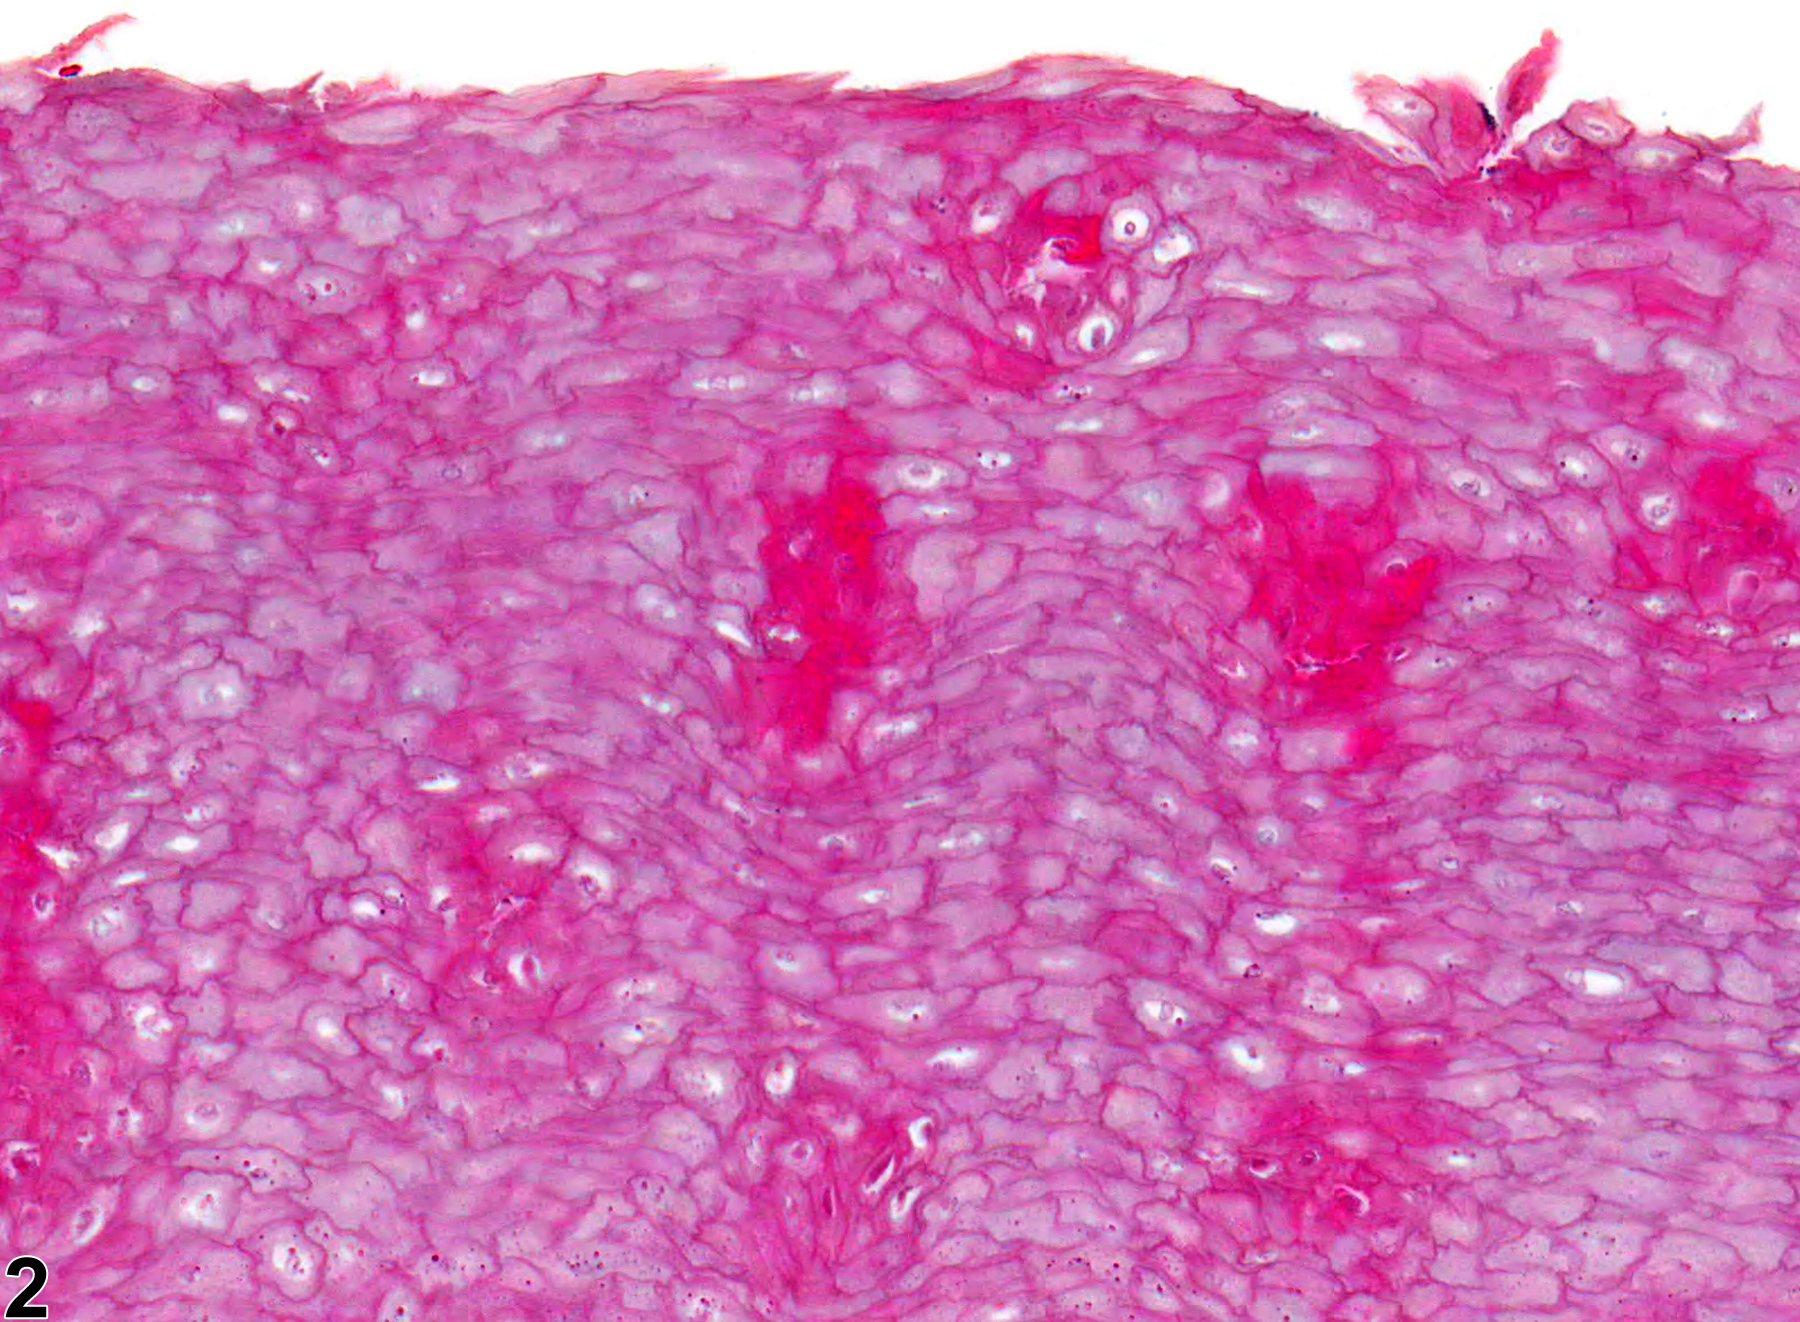 Image of hyperkeratosis in the tongue from a female F344/N rat in a chronic study